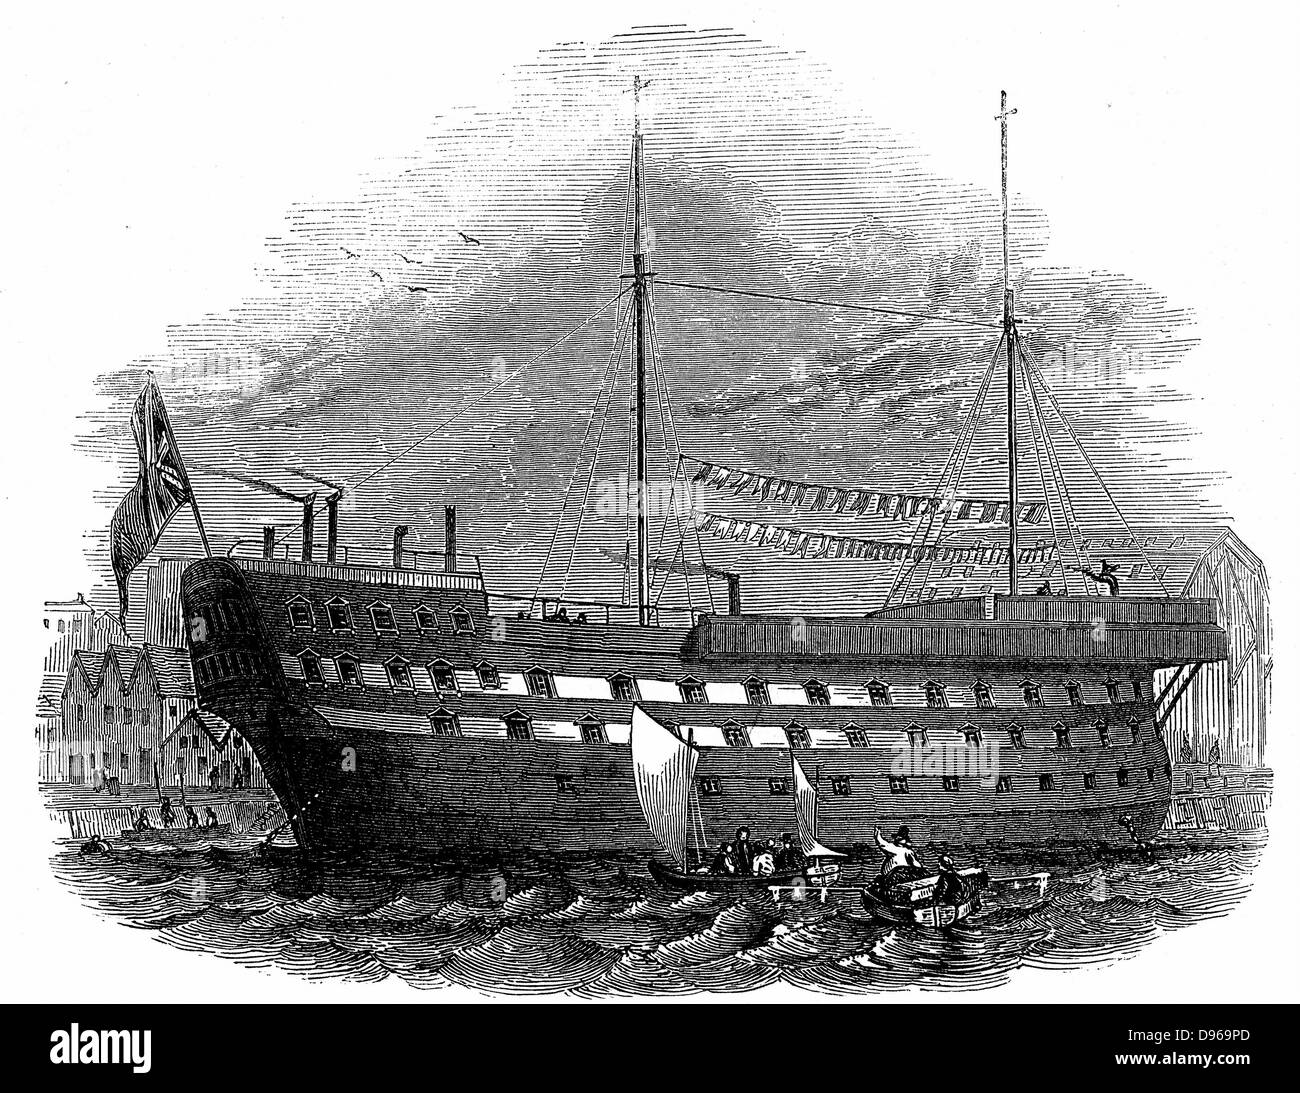 Prison Hulks: Convict hulk 'Warrior' at Woolwich. This hulk held 600 and was an intermediate confinement between an ordinary gaol or transportation.  Prisoners were used as labourers in the naval dockyards Hulks (Tenders) were usually old naval vessels that were no longer seaworthy. From 'The Illustrated London News', 1848.  Wood engraving Stock Photo